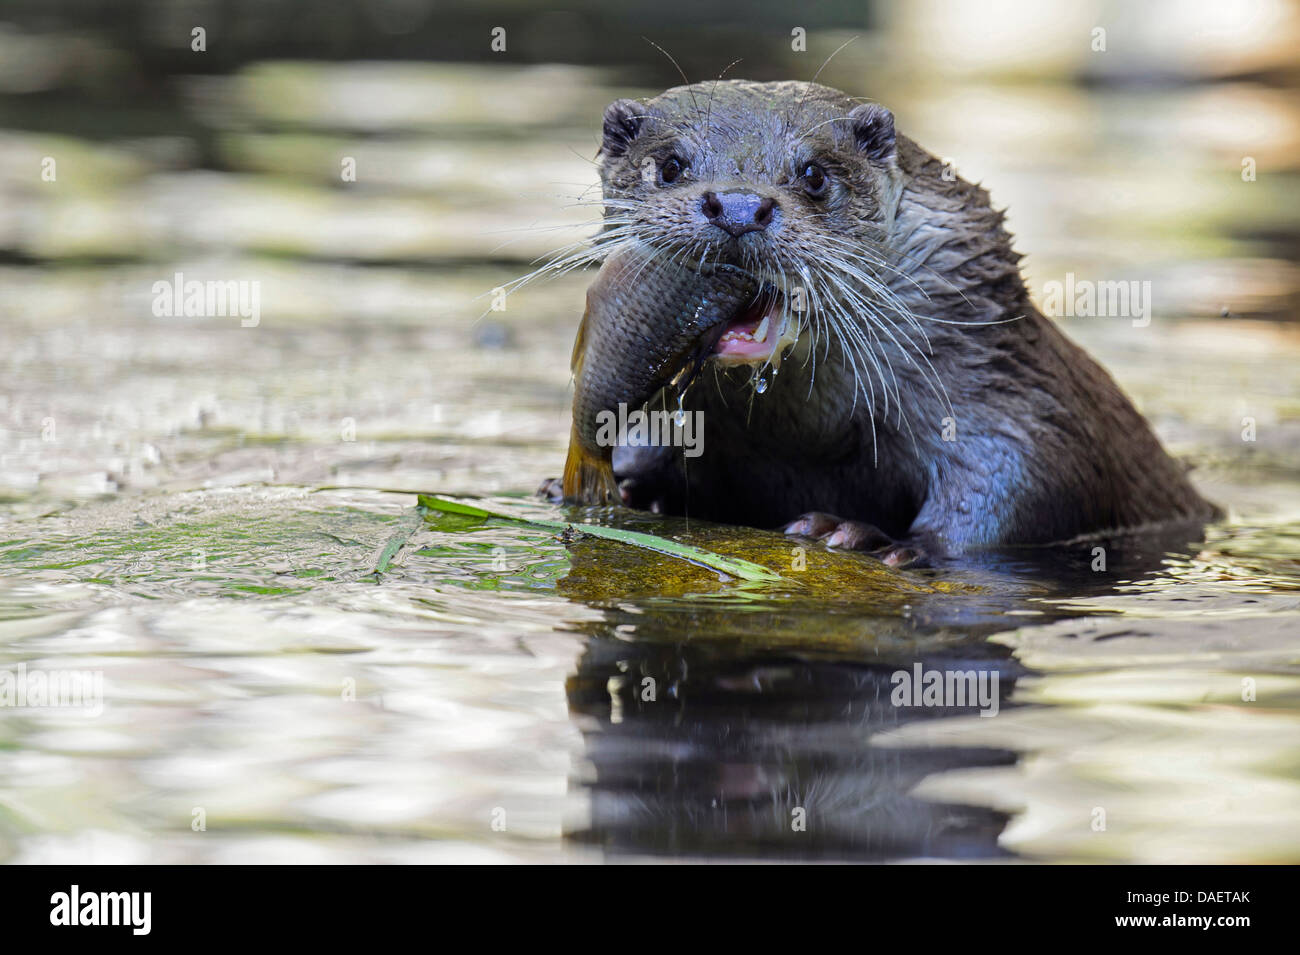 European river otter, European Otter, Eurasian Otter (Lutra lutra), in the water with a fish in the mouth, Germany Stock Photo